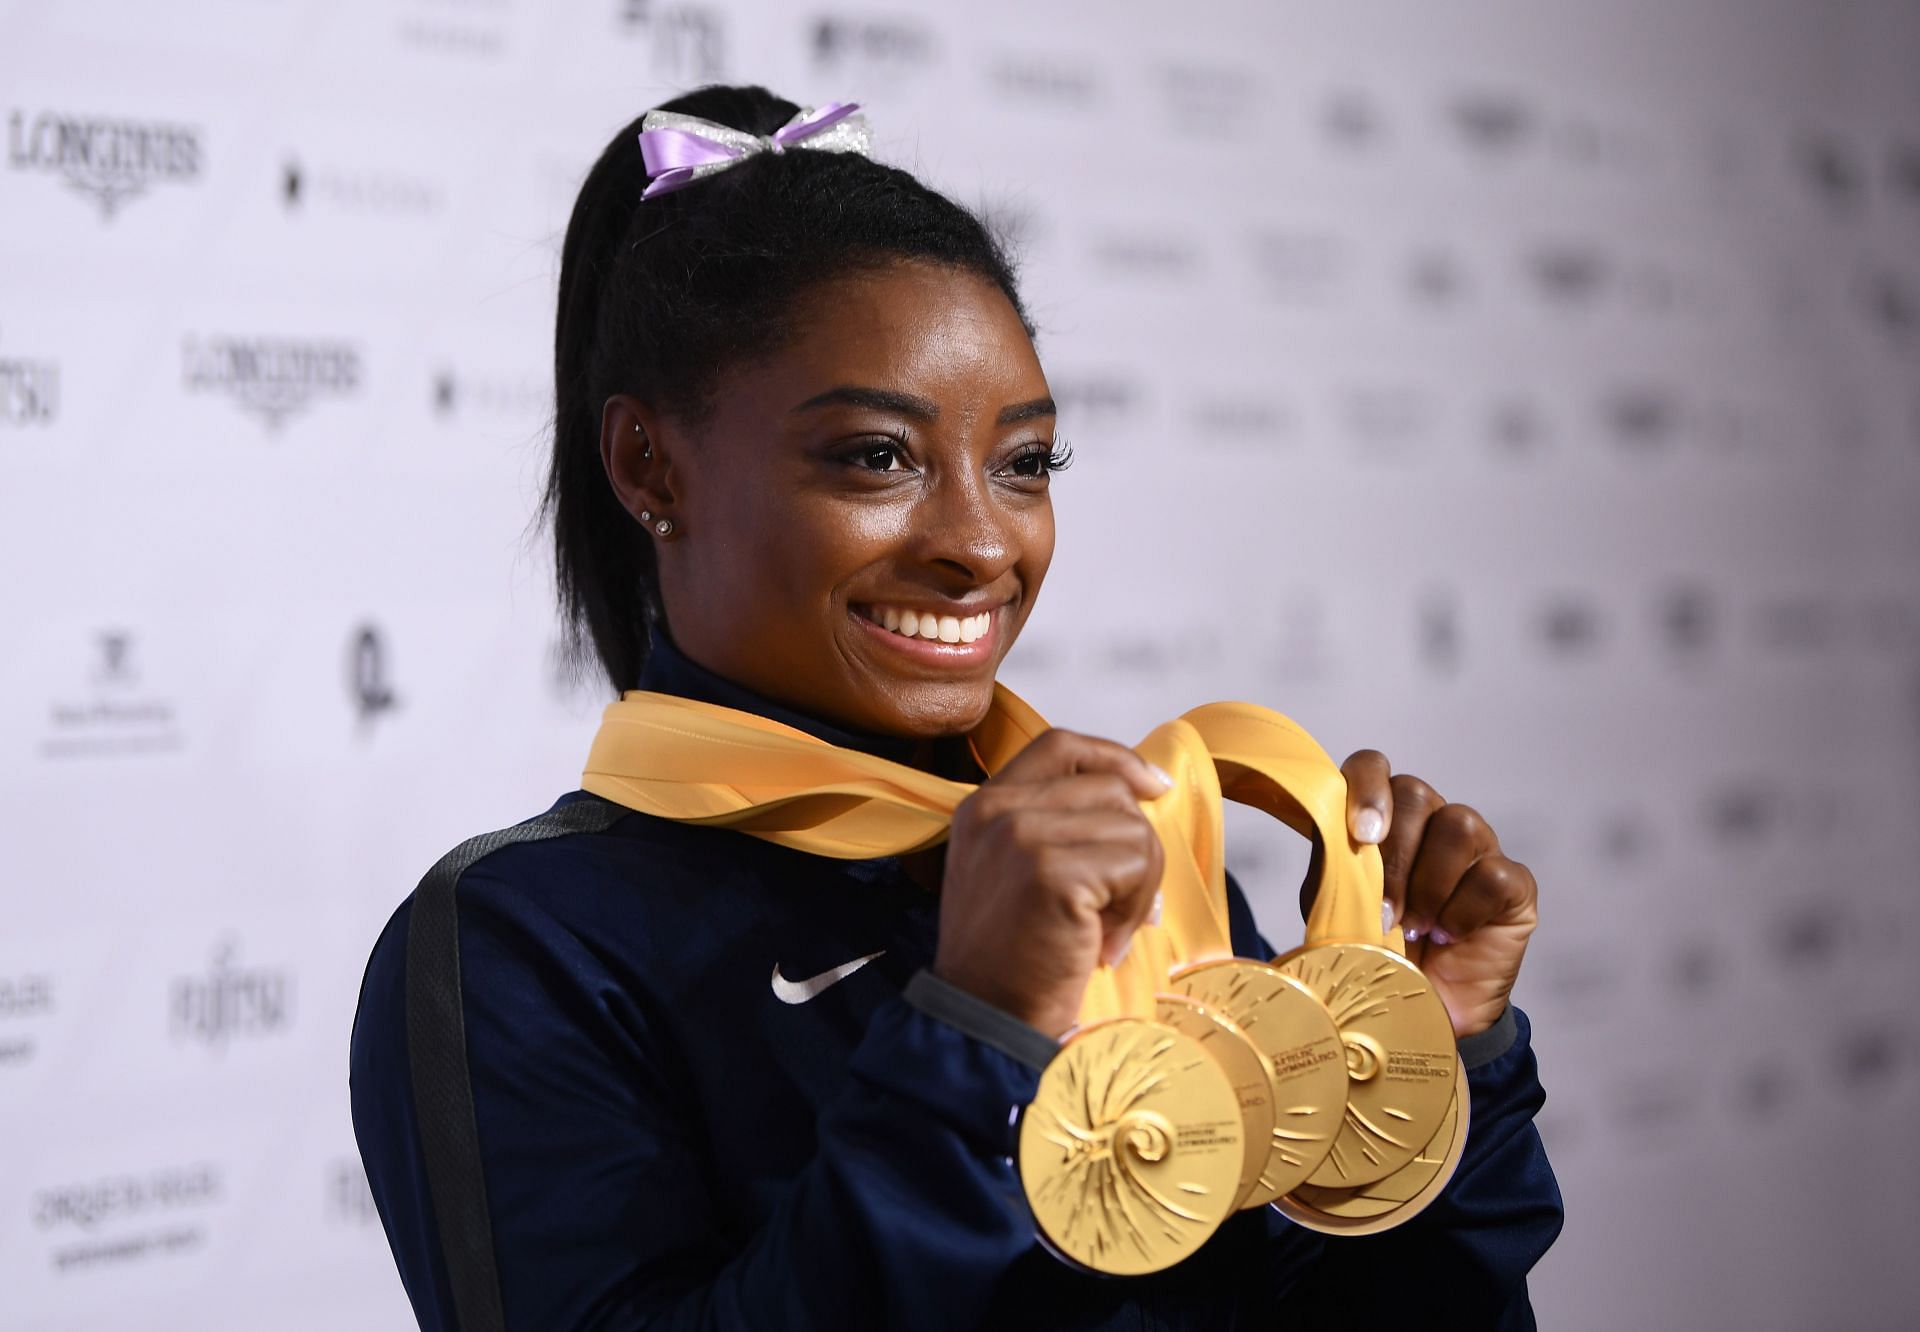 Simone Biles poses with the medals she won at the 2019 World Championships